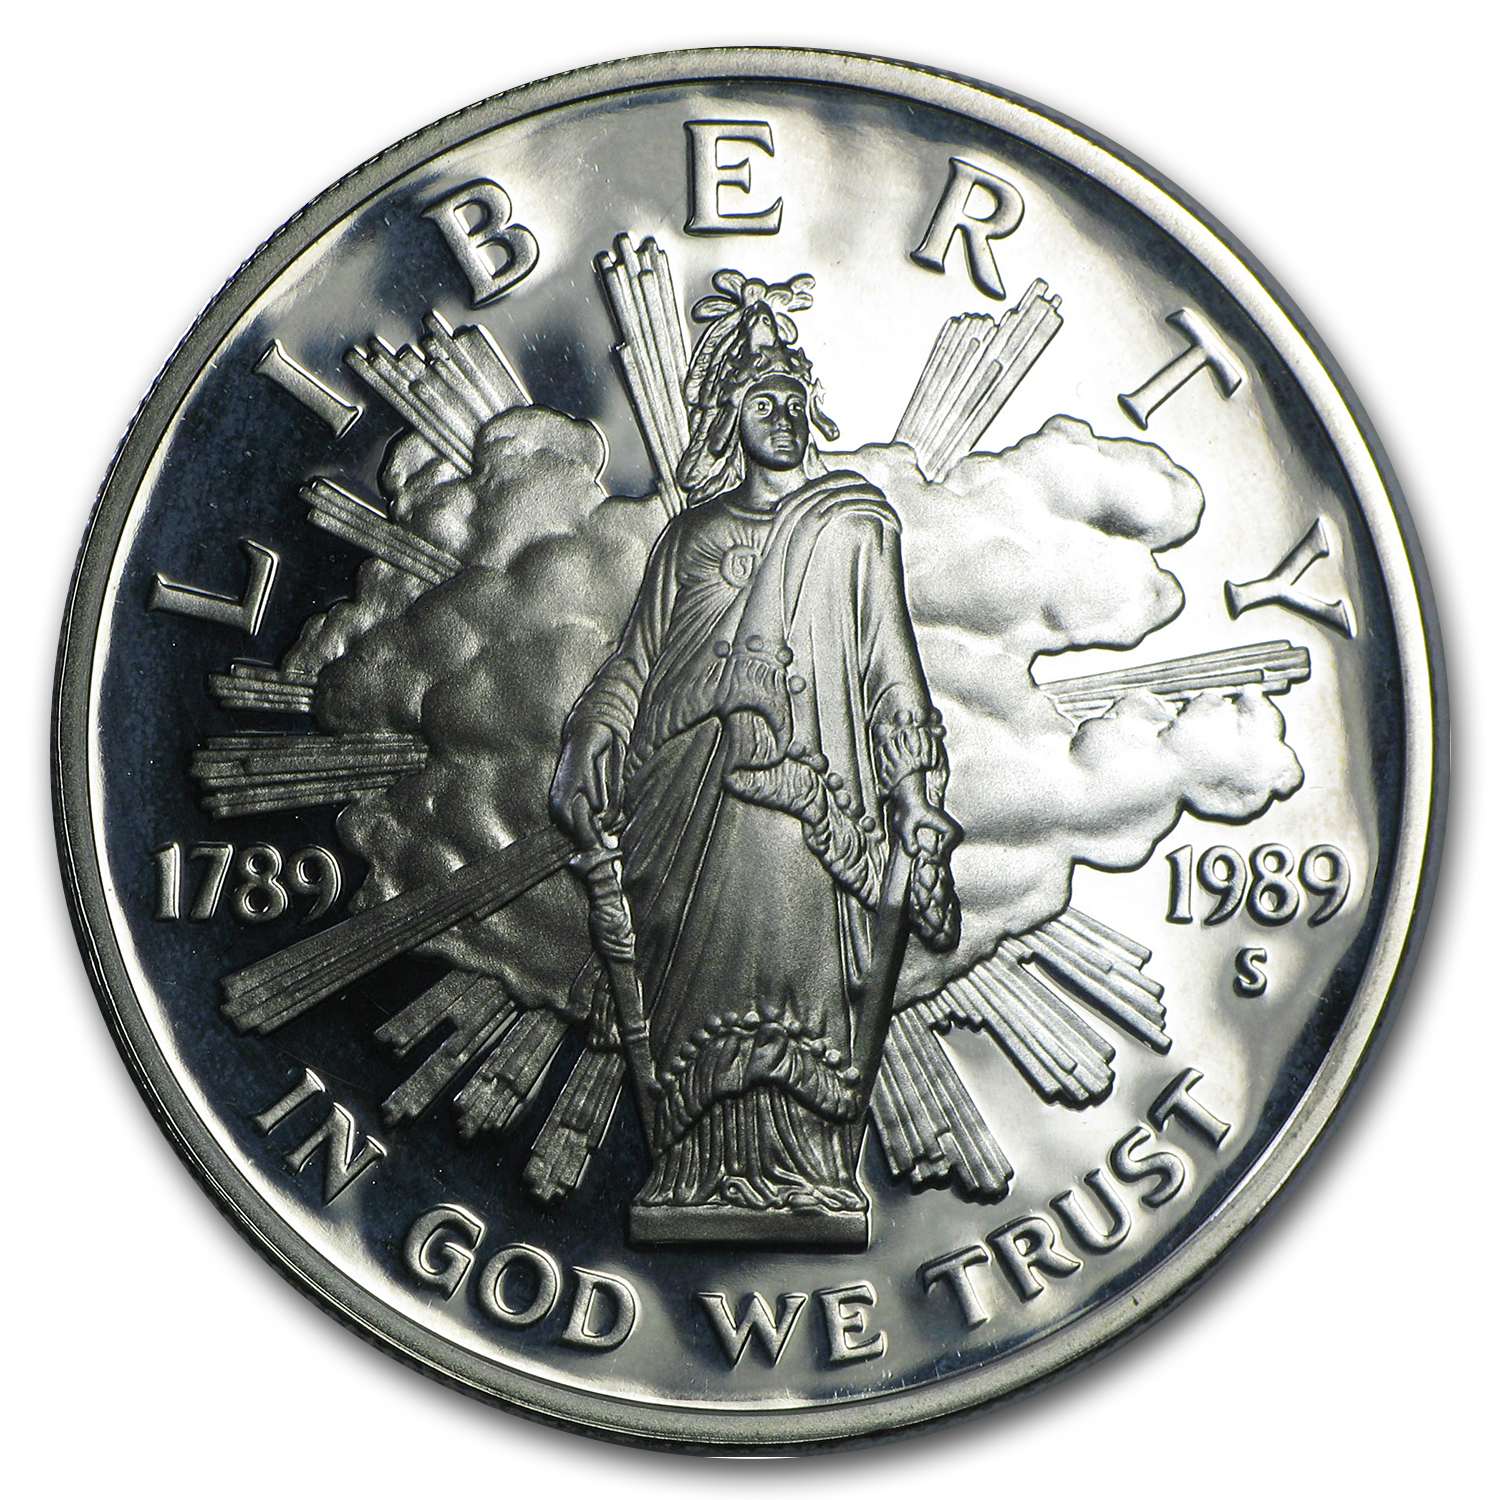 Buy 1989-S Congressional $1 Silver Commem Proof (Capsule Only)